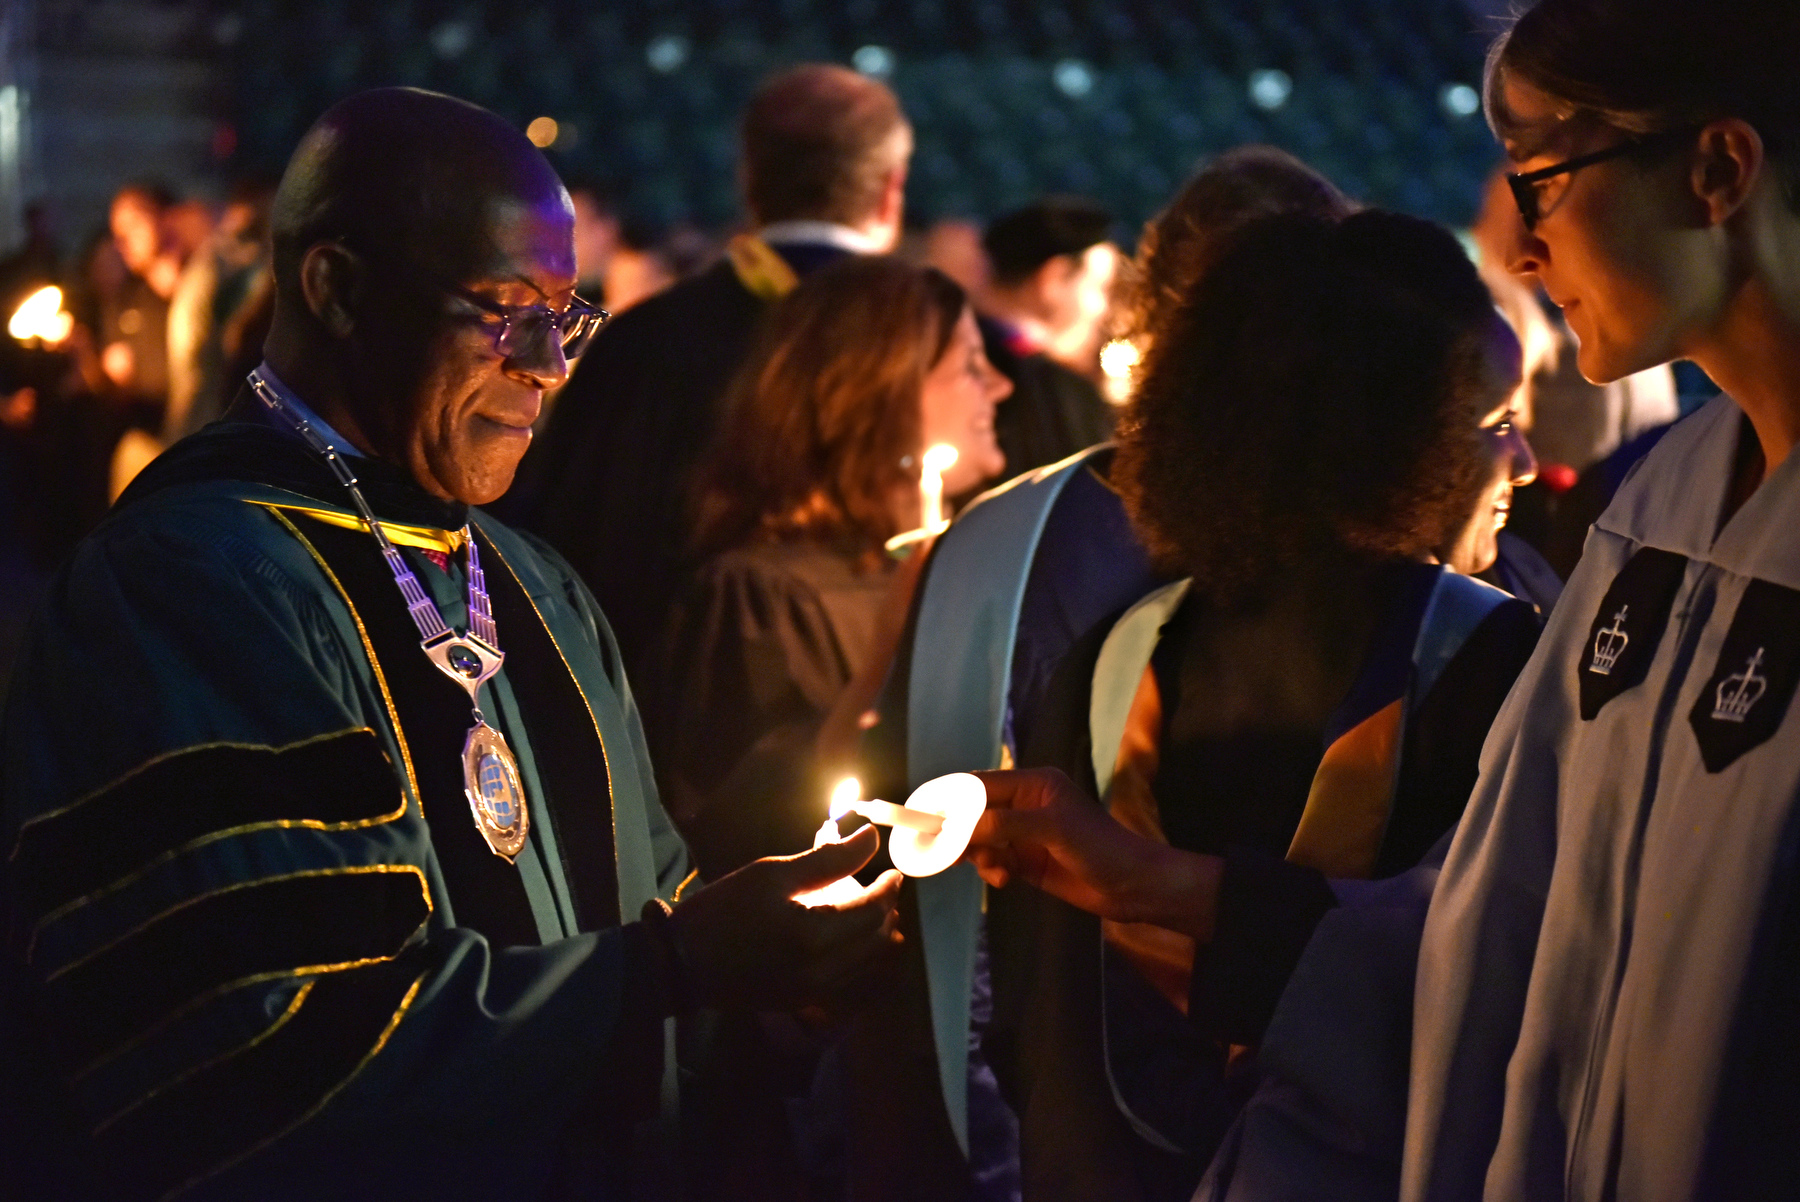 At the Welcoming Torchlight Ceremony, President Peter O. Nwosu lights the candle of Kristi Eck, Chief of Staff and Executive Director of Strategic Initiatives, External Partnerships and Legislative Affairs.